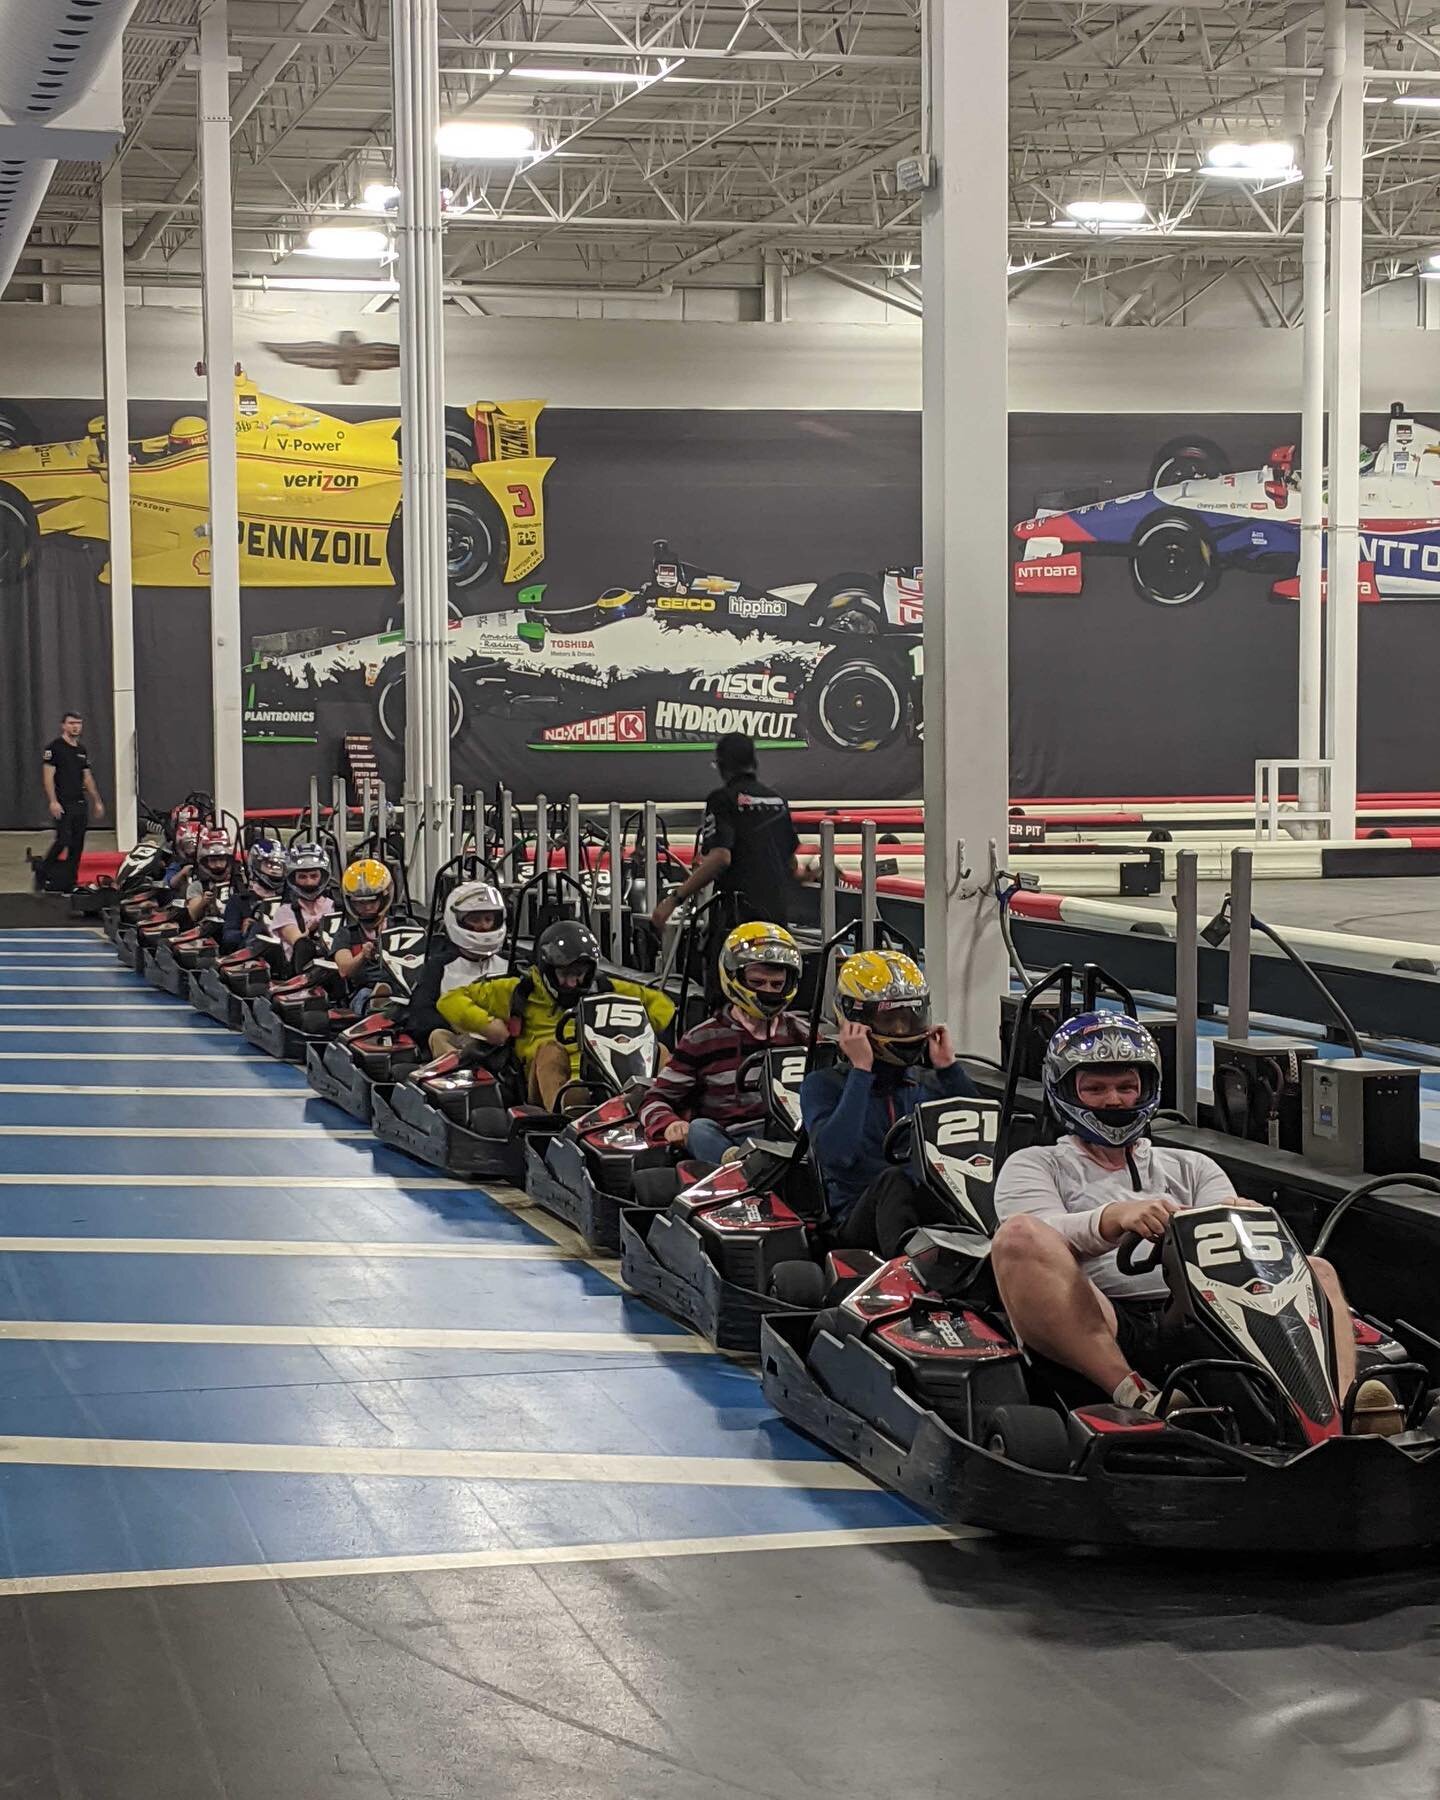 Last Saturday, PER had a great time at @k1speed for our annual go karting tournament. Congrats to James, our aero subteam lead, for taking first!